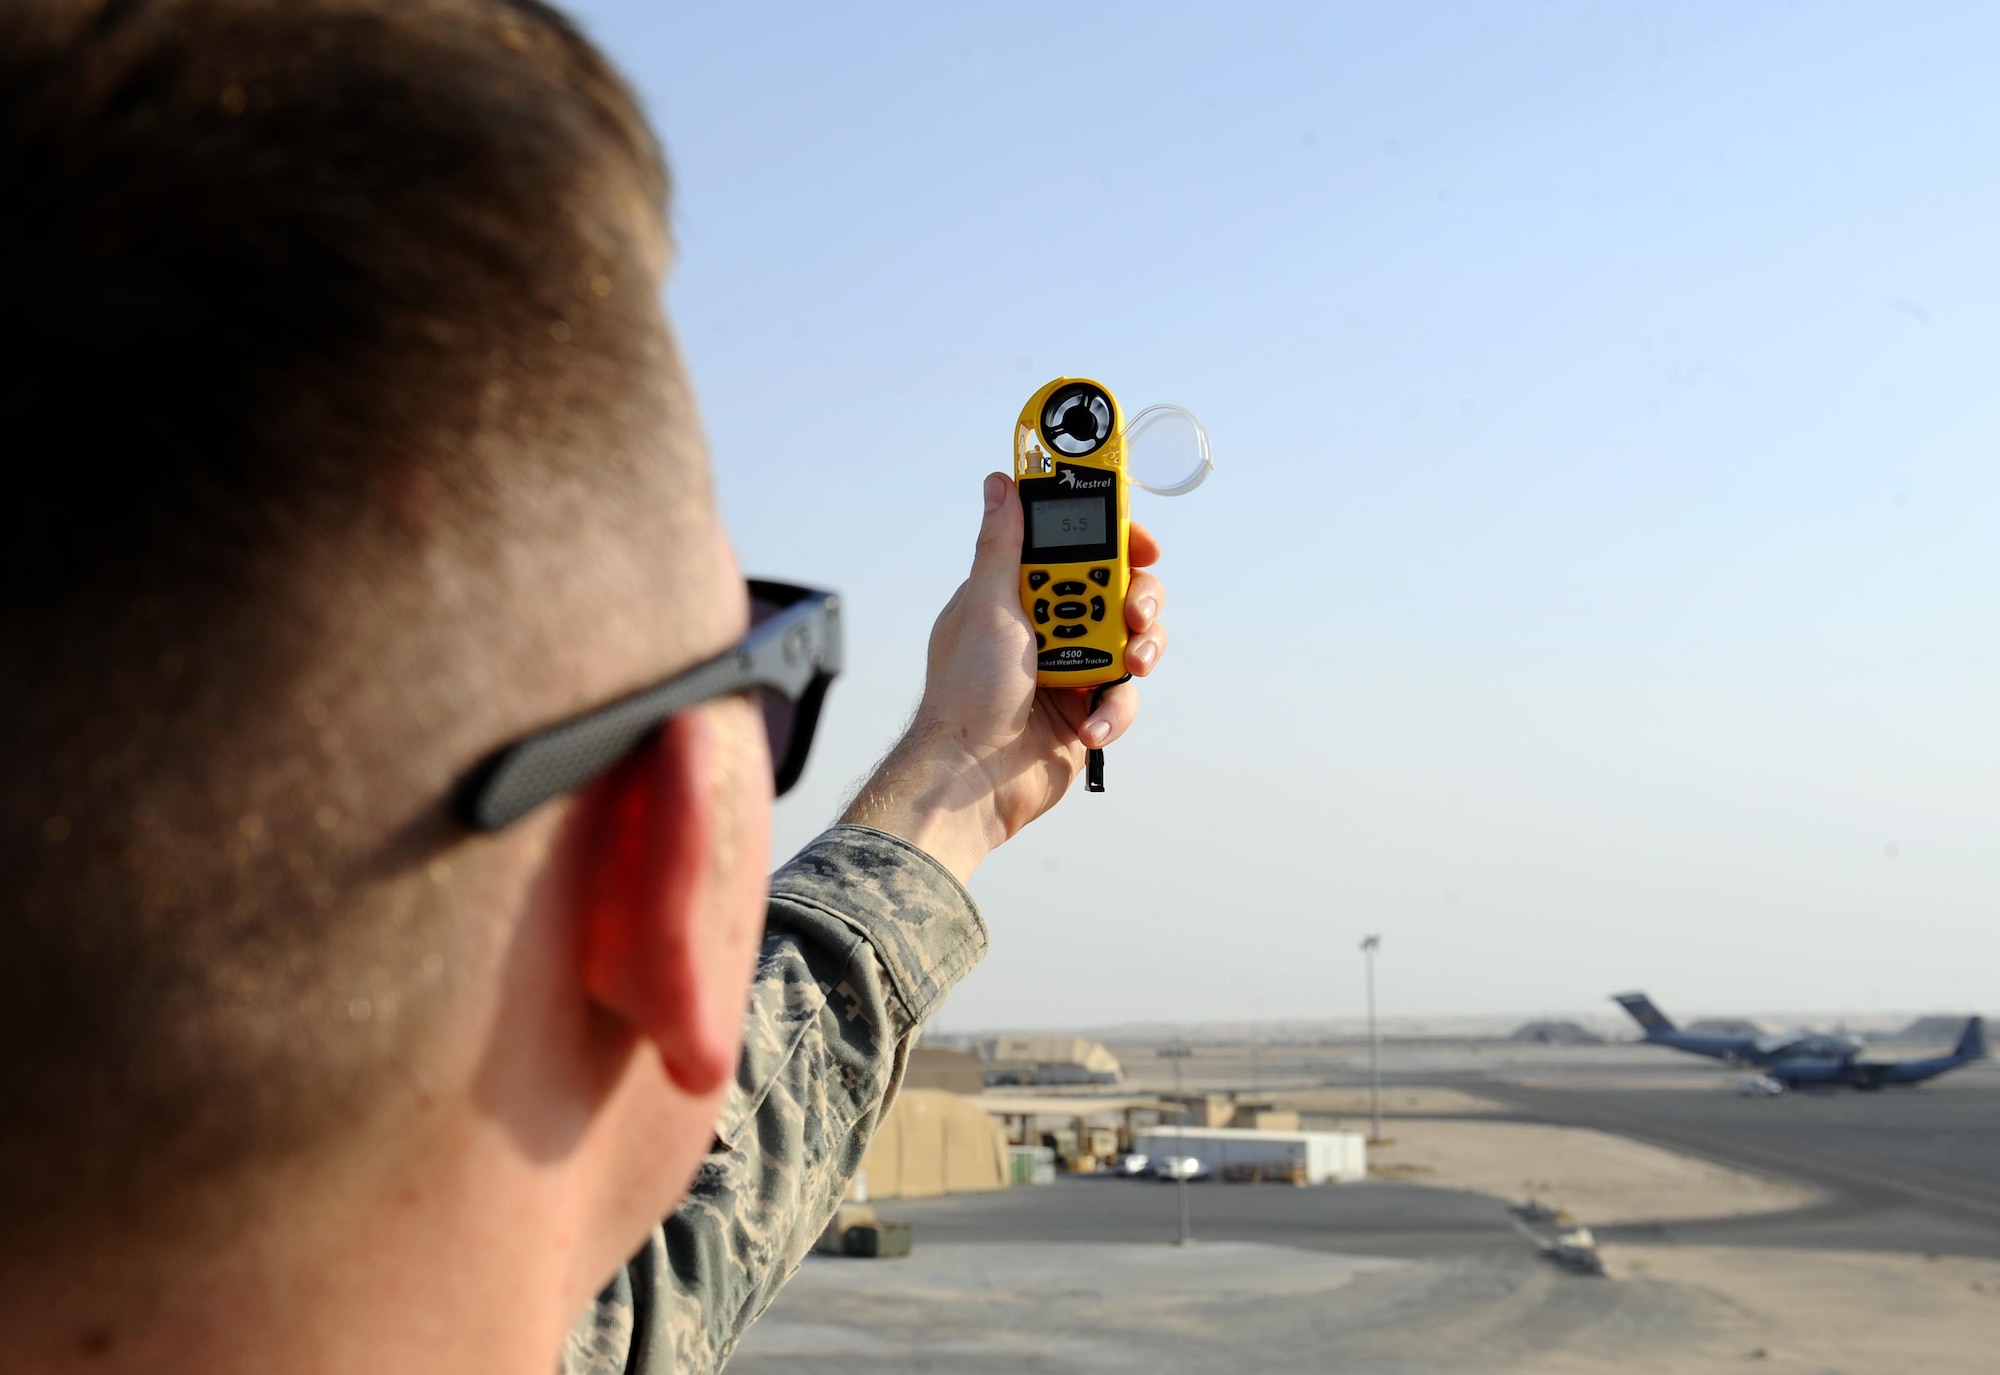 U.S. Air Force Senior Airman David Baily, 386th 386th Expeditionary Operations Support Squadron weather forecaster, uses a hand-held wind meter to determine wind gusts at an undisclosed location in Southwest Asia, Oct. 16, 2015. Air Force weather forecasters rely on traditional observation techniques to provide accurate weather intelligence for aircraft flying missions in support of Operation INHERENT RESOLVE. (U.S. Air Force photo by Staff Sgt. Tyler Alexander/Released)